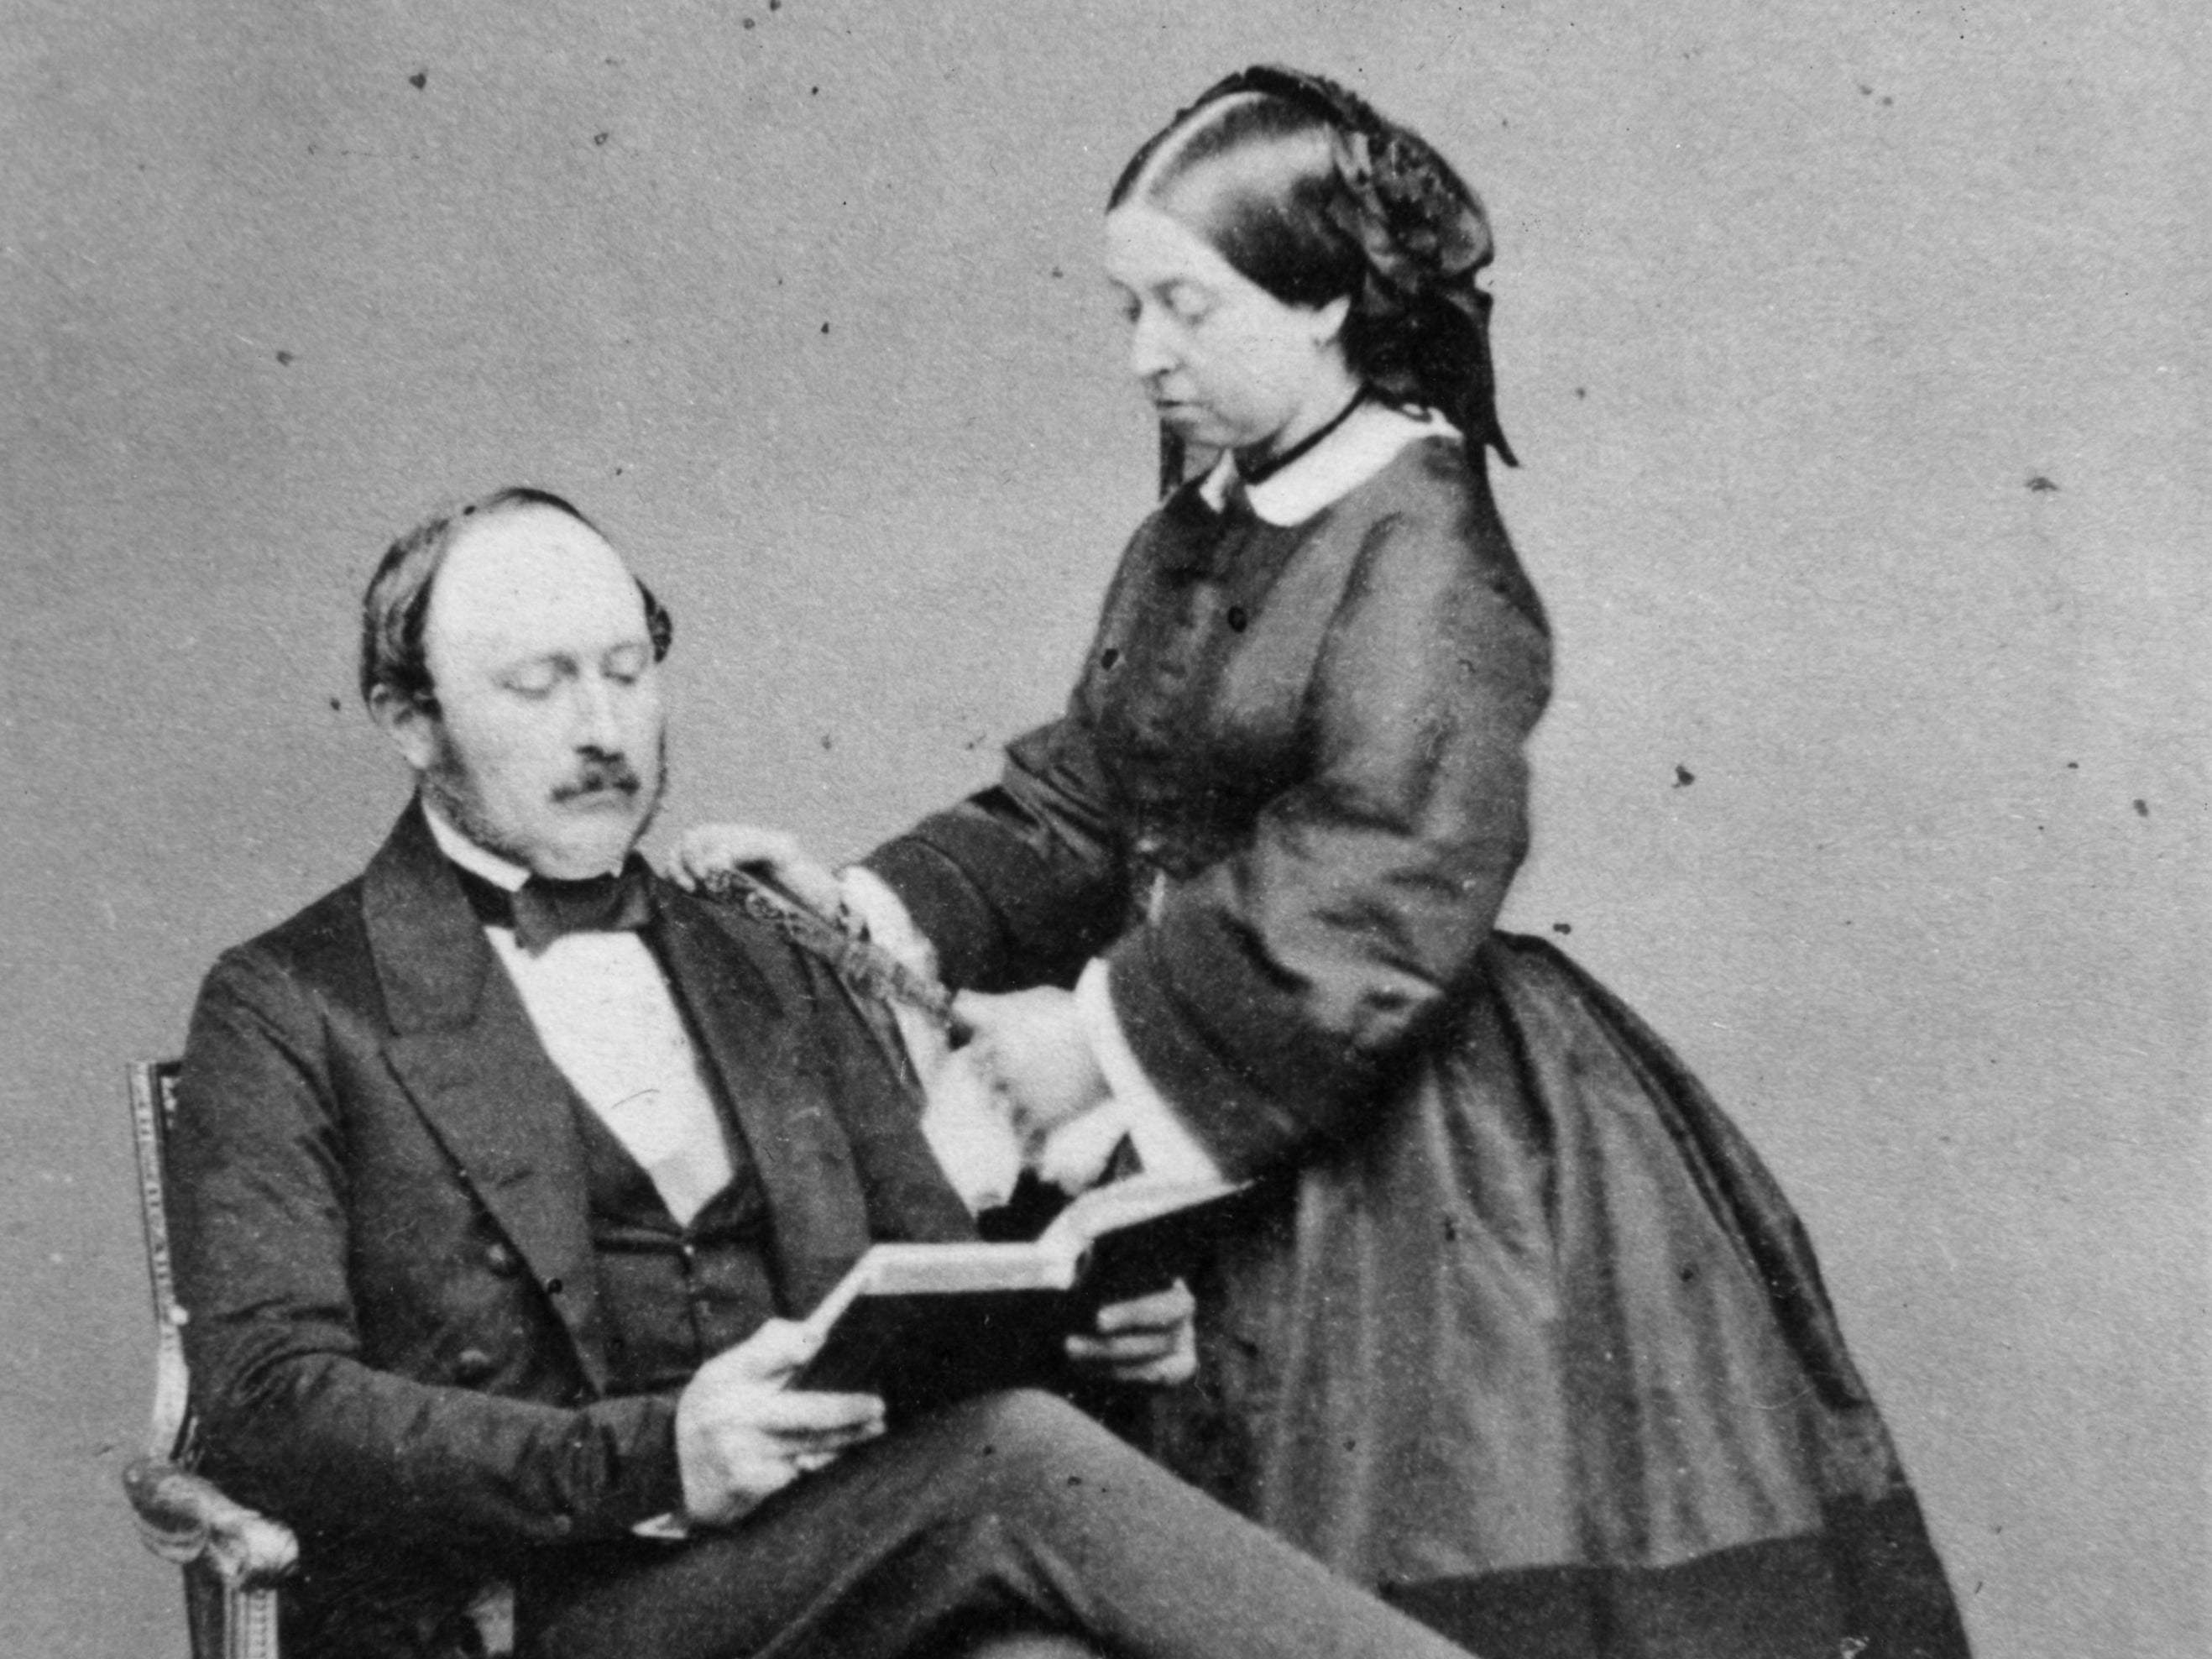 Prince Albert (L) and Queen Victoria (R) at Buckingham Palace